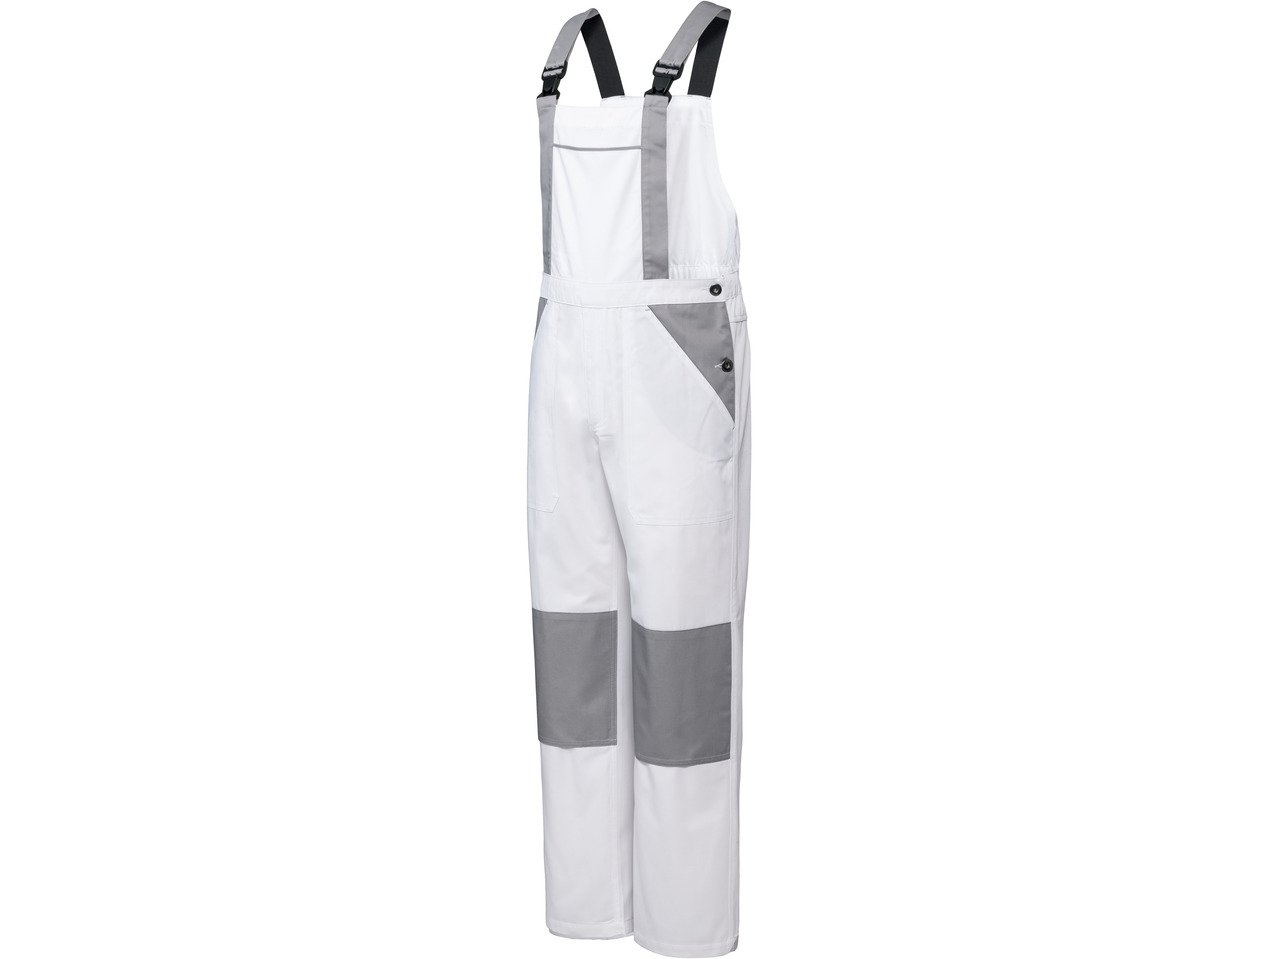 Painter's Dungarees